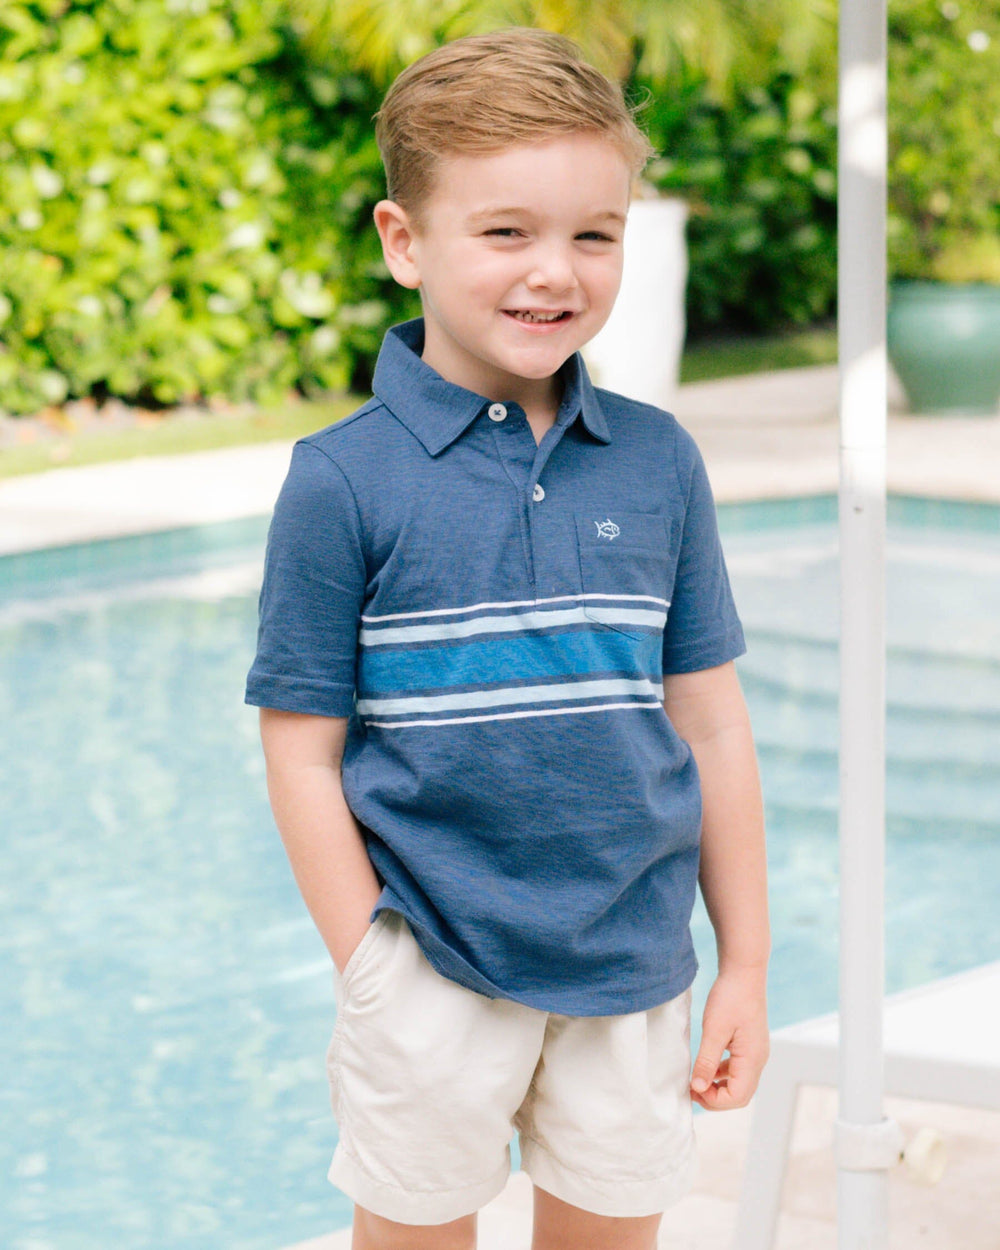 The lifestyle view of the Southern Tide Youth Mesa Sun Farer Polo Shirt by Southern Tide - Aged Denim